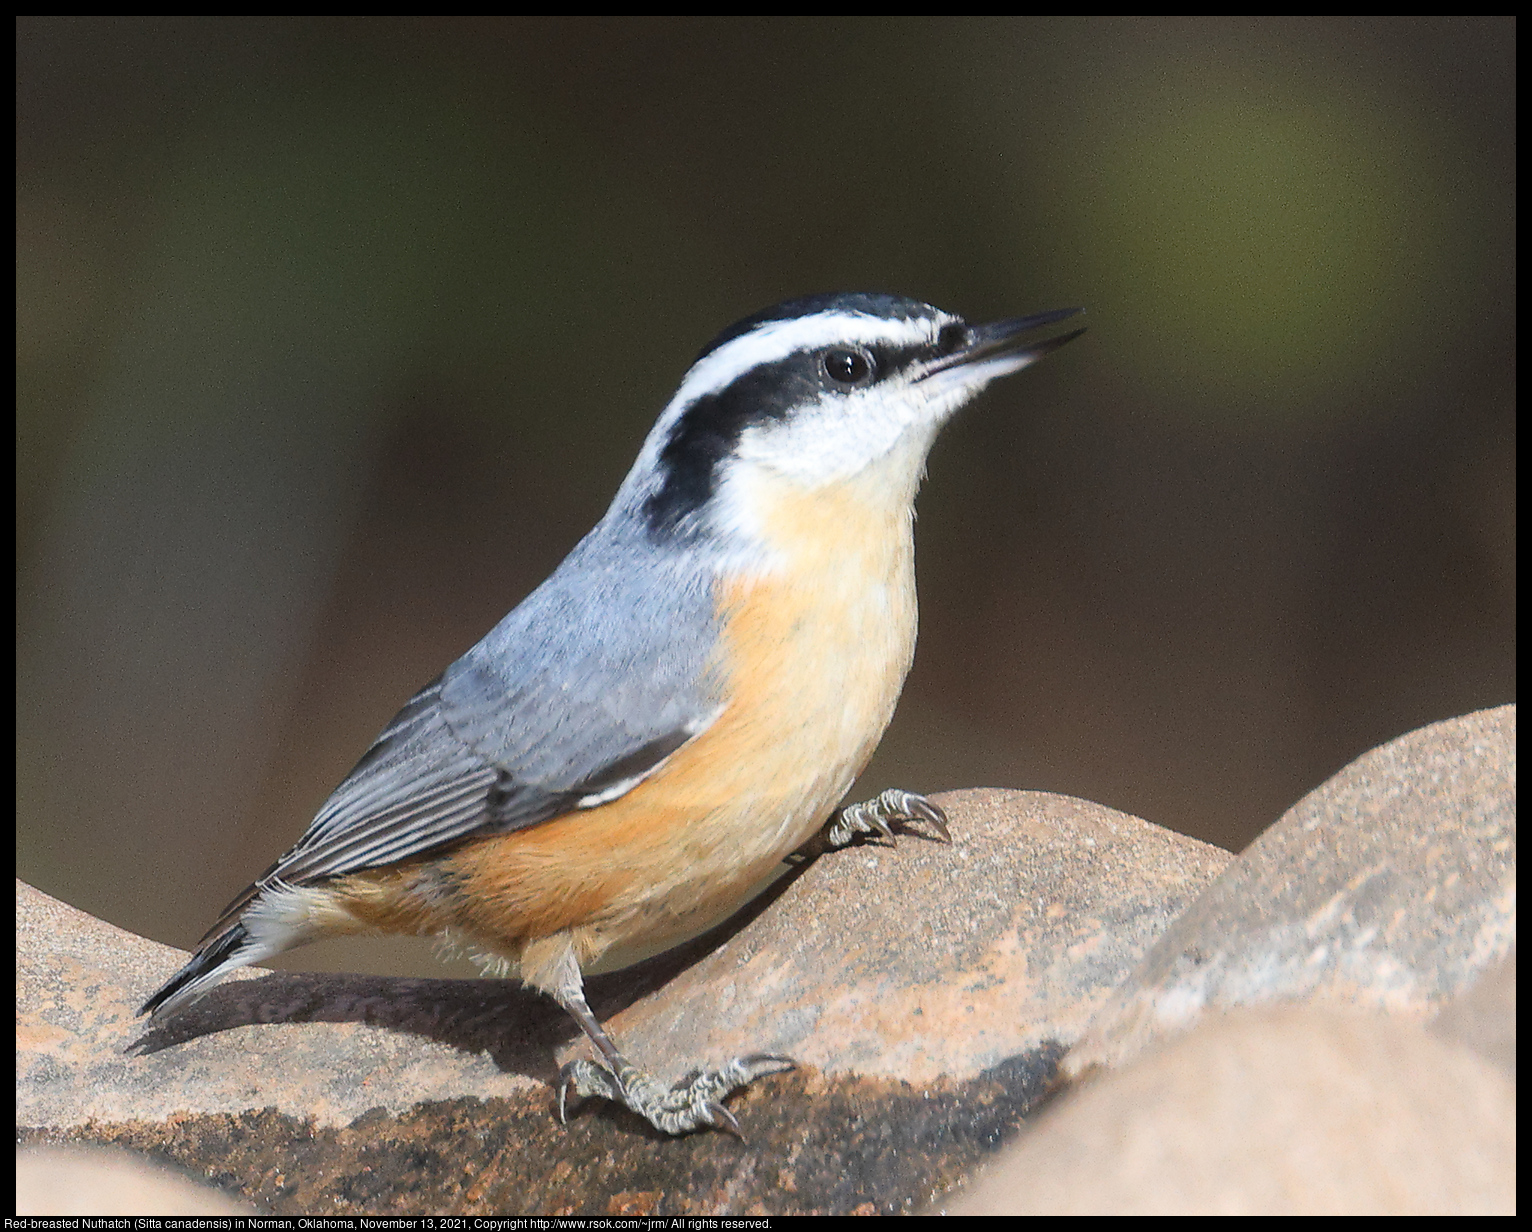 Red-breasted Nuthatch (Sitta canadensis) in Norman, Oklahoma, November 13, 2021